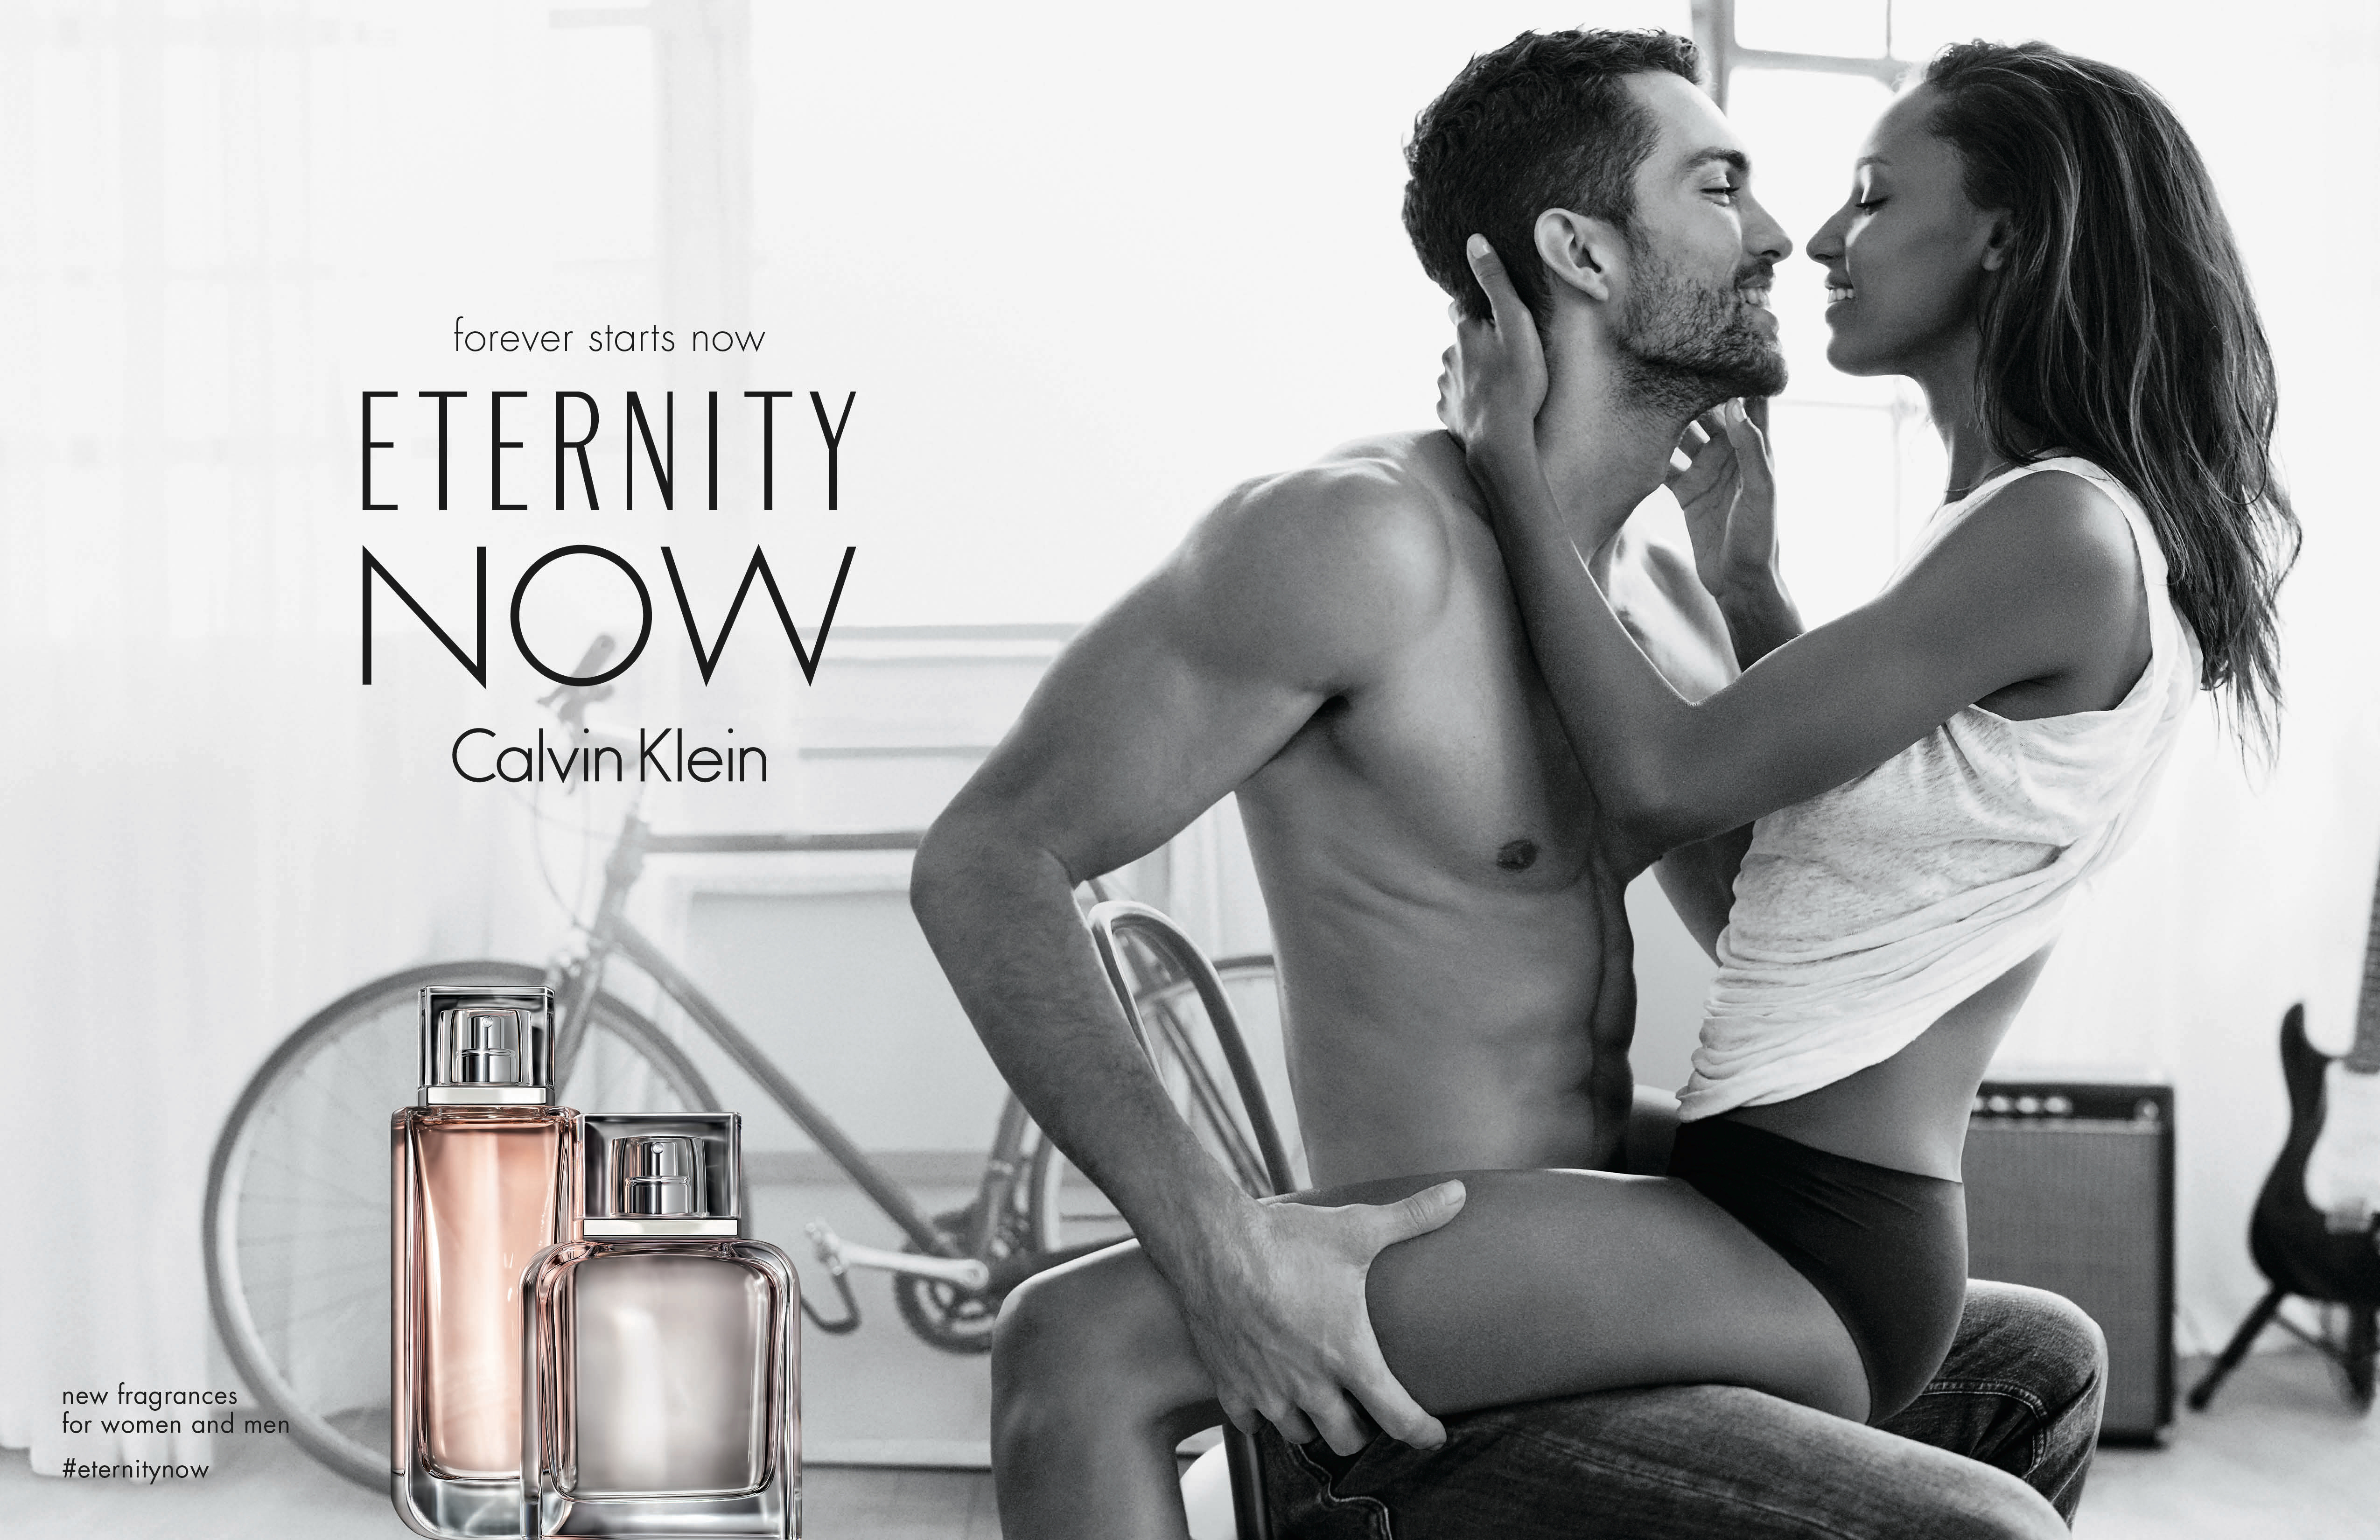 At the time a couple, models Tobias Sorensen and Jasmine Tookes for Calvin Klein Eternity Now fragrance campaign.